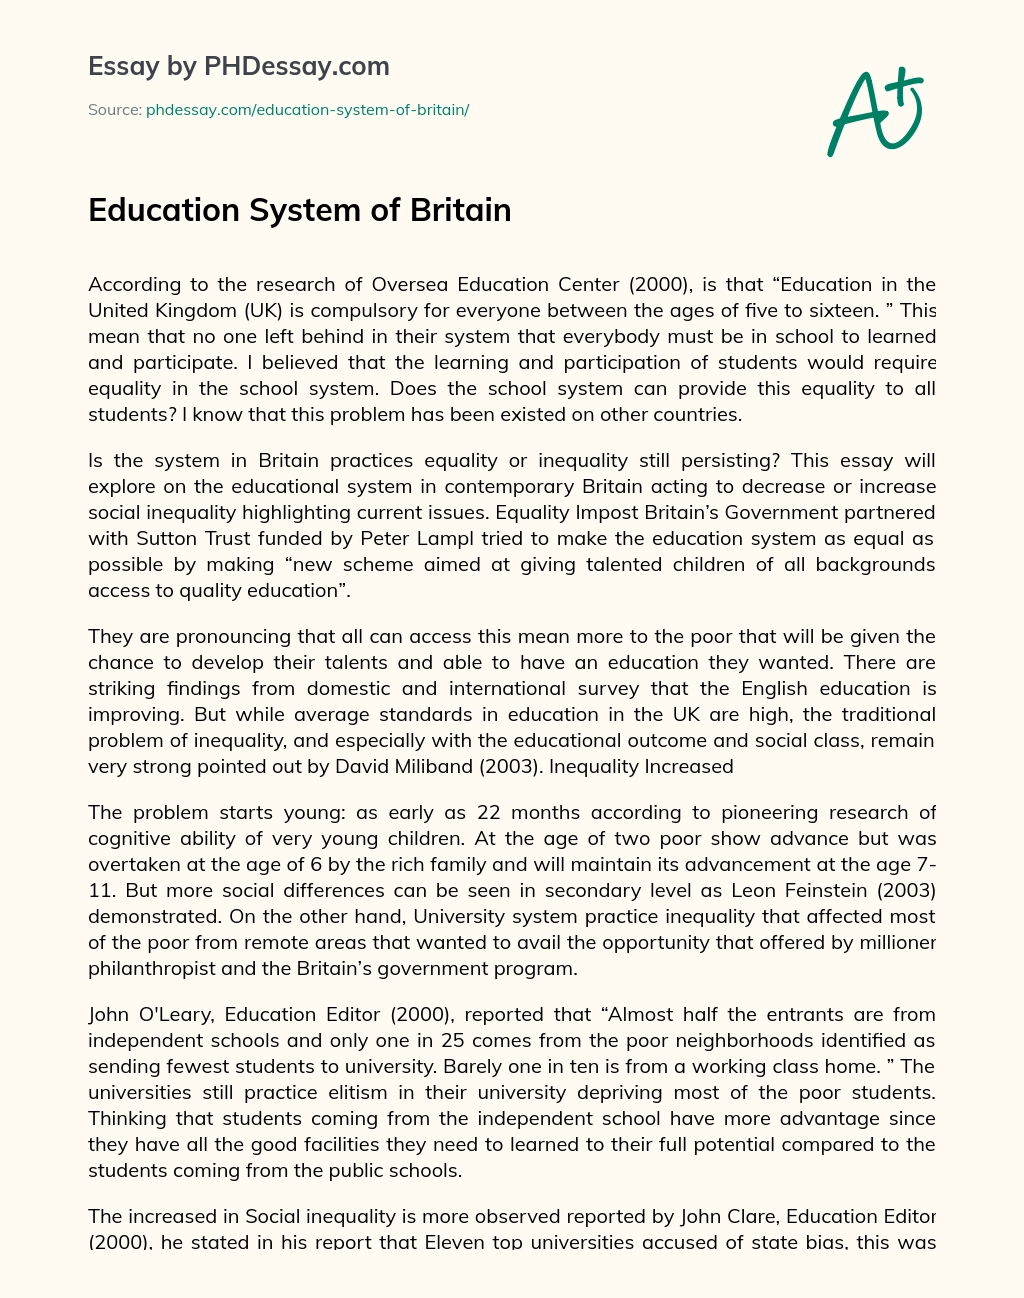 write an essay about education system in great britain